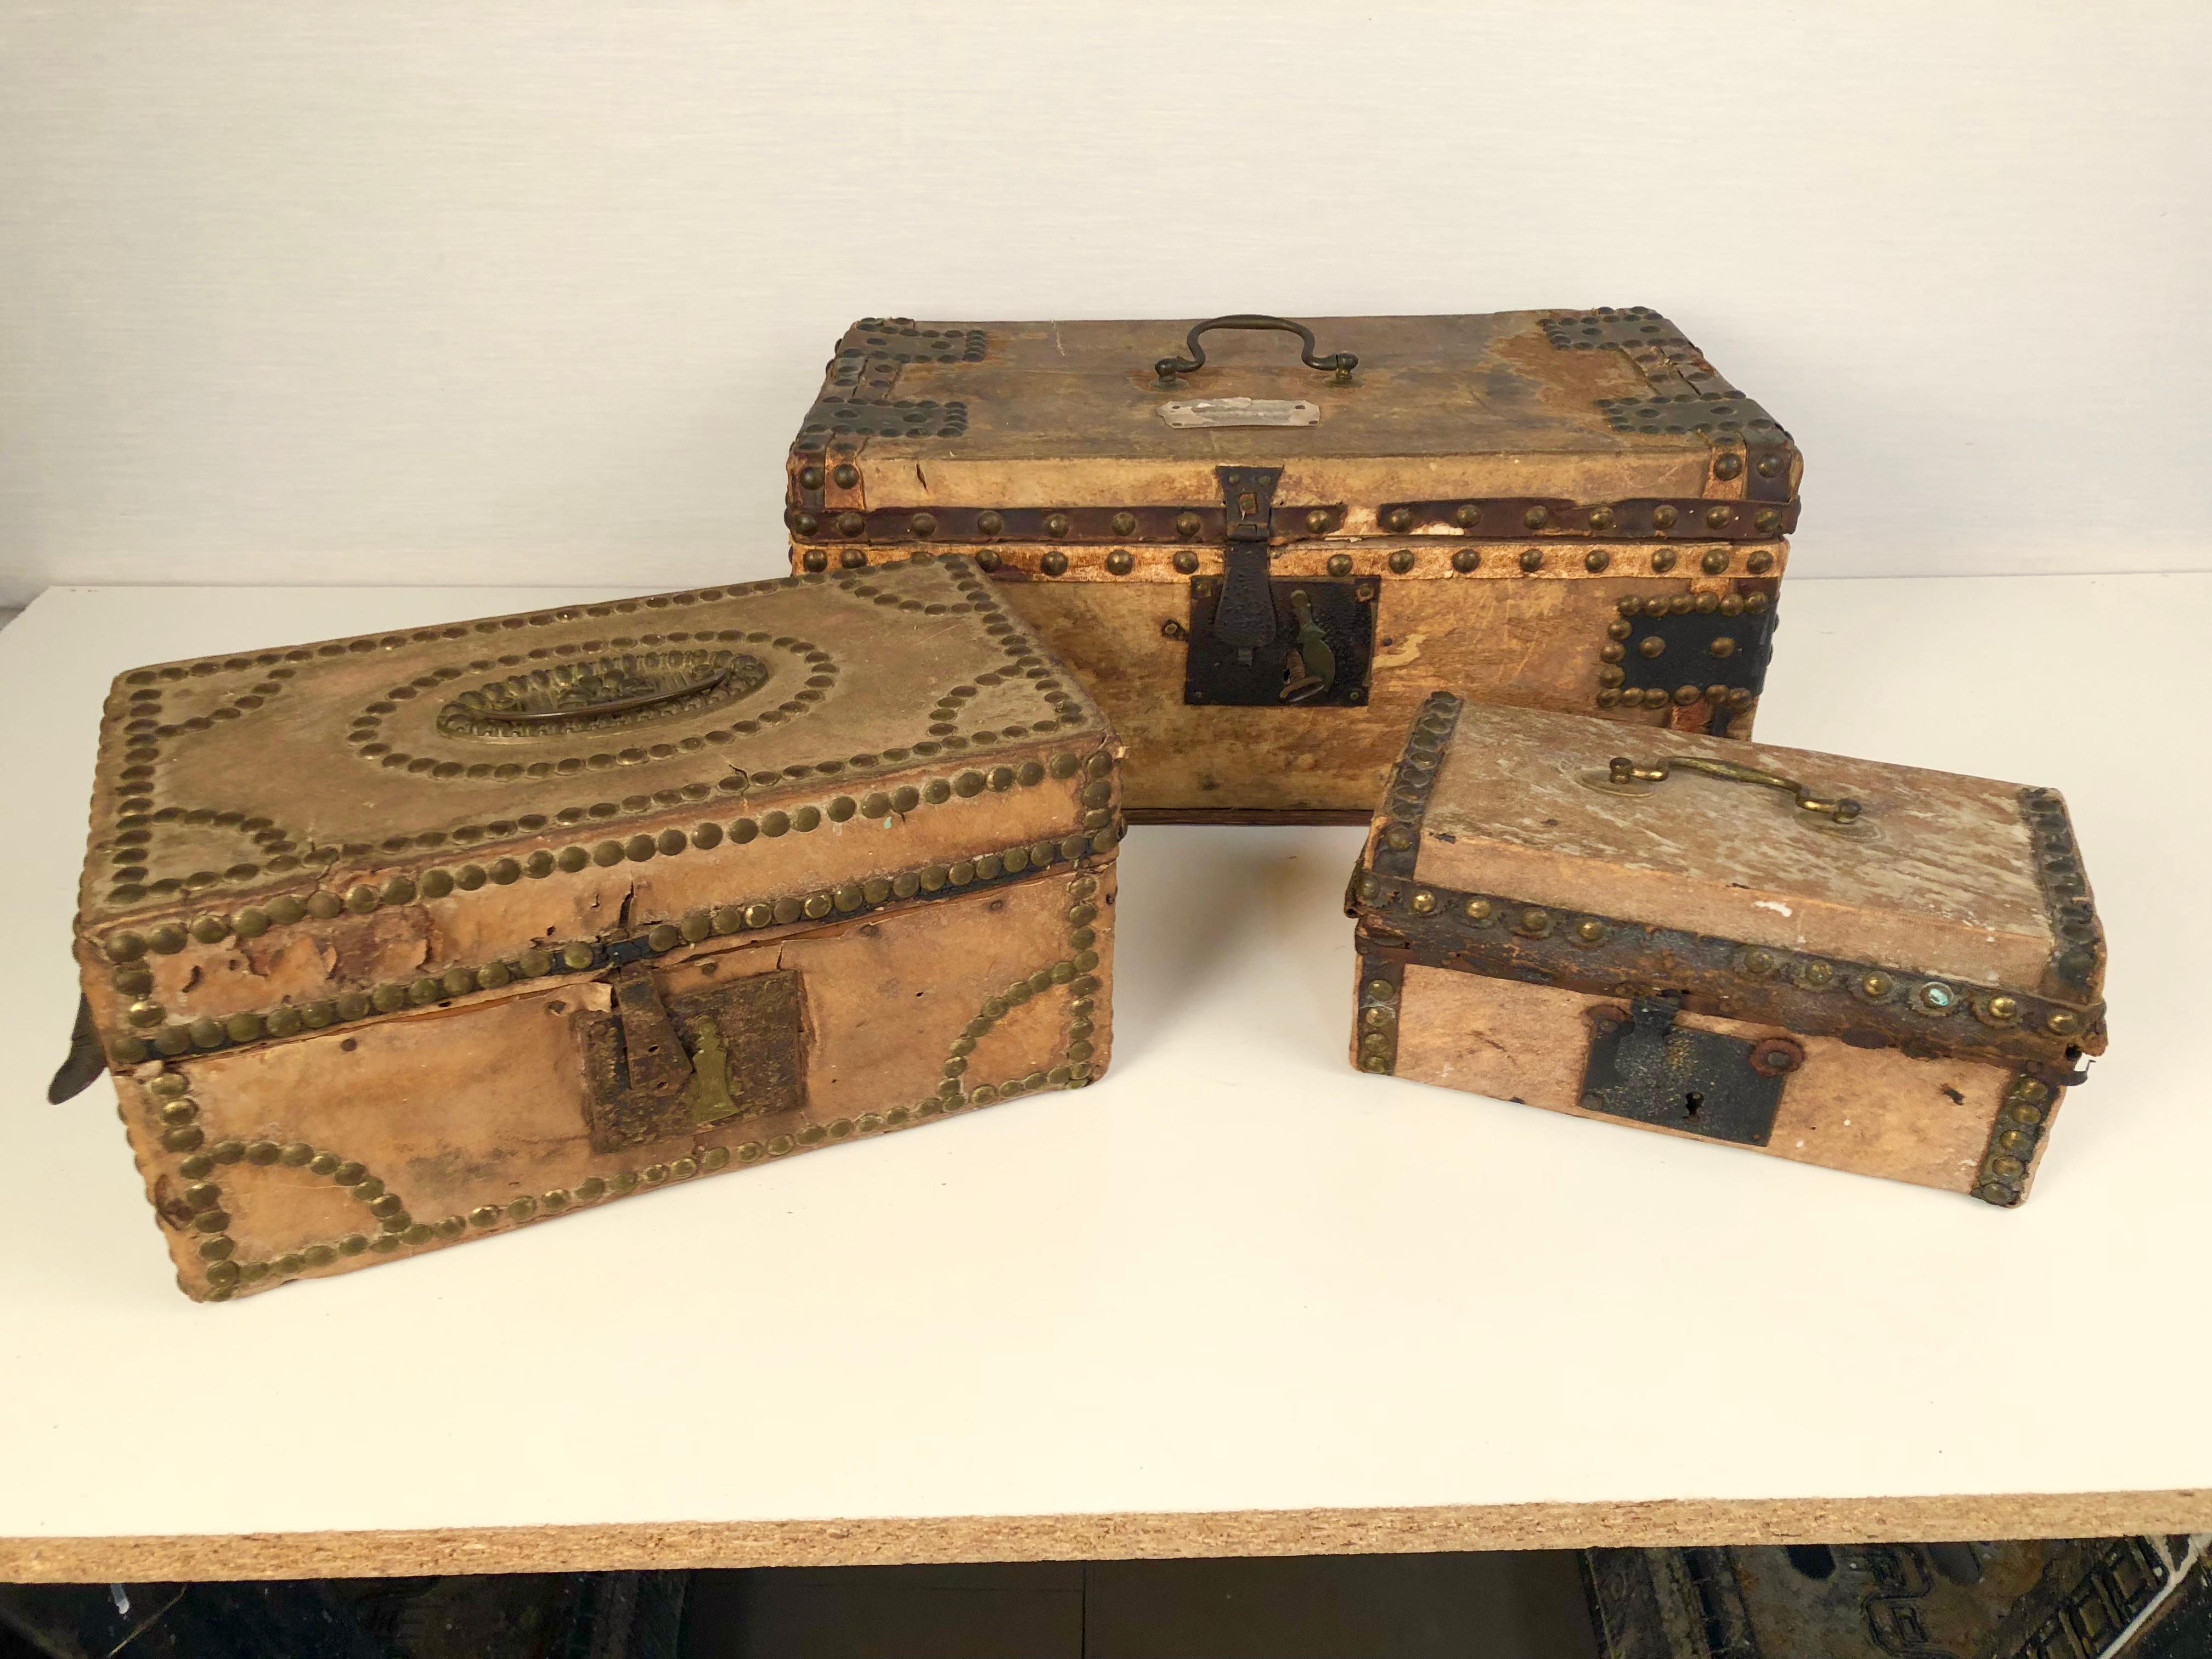 A collection of three 18th century parchment covered boxes with nailhead decoration and brass handles, the largest retaining its original key, European.